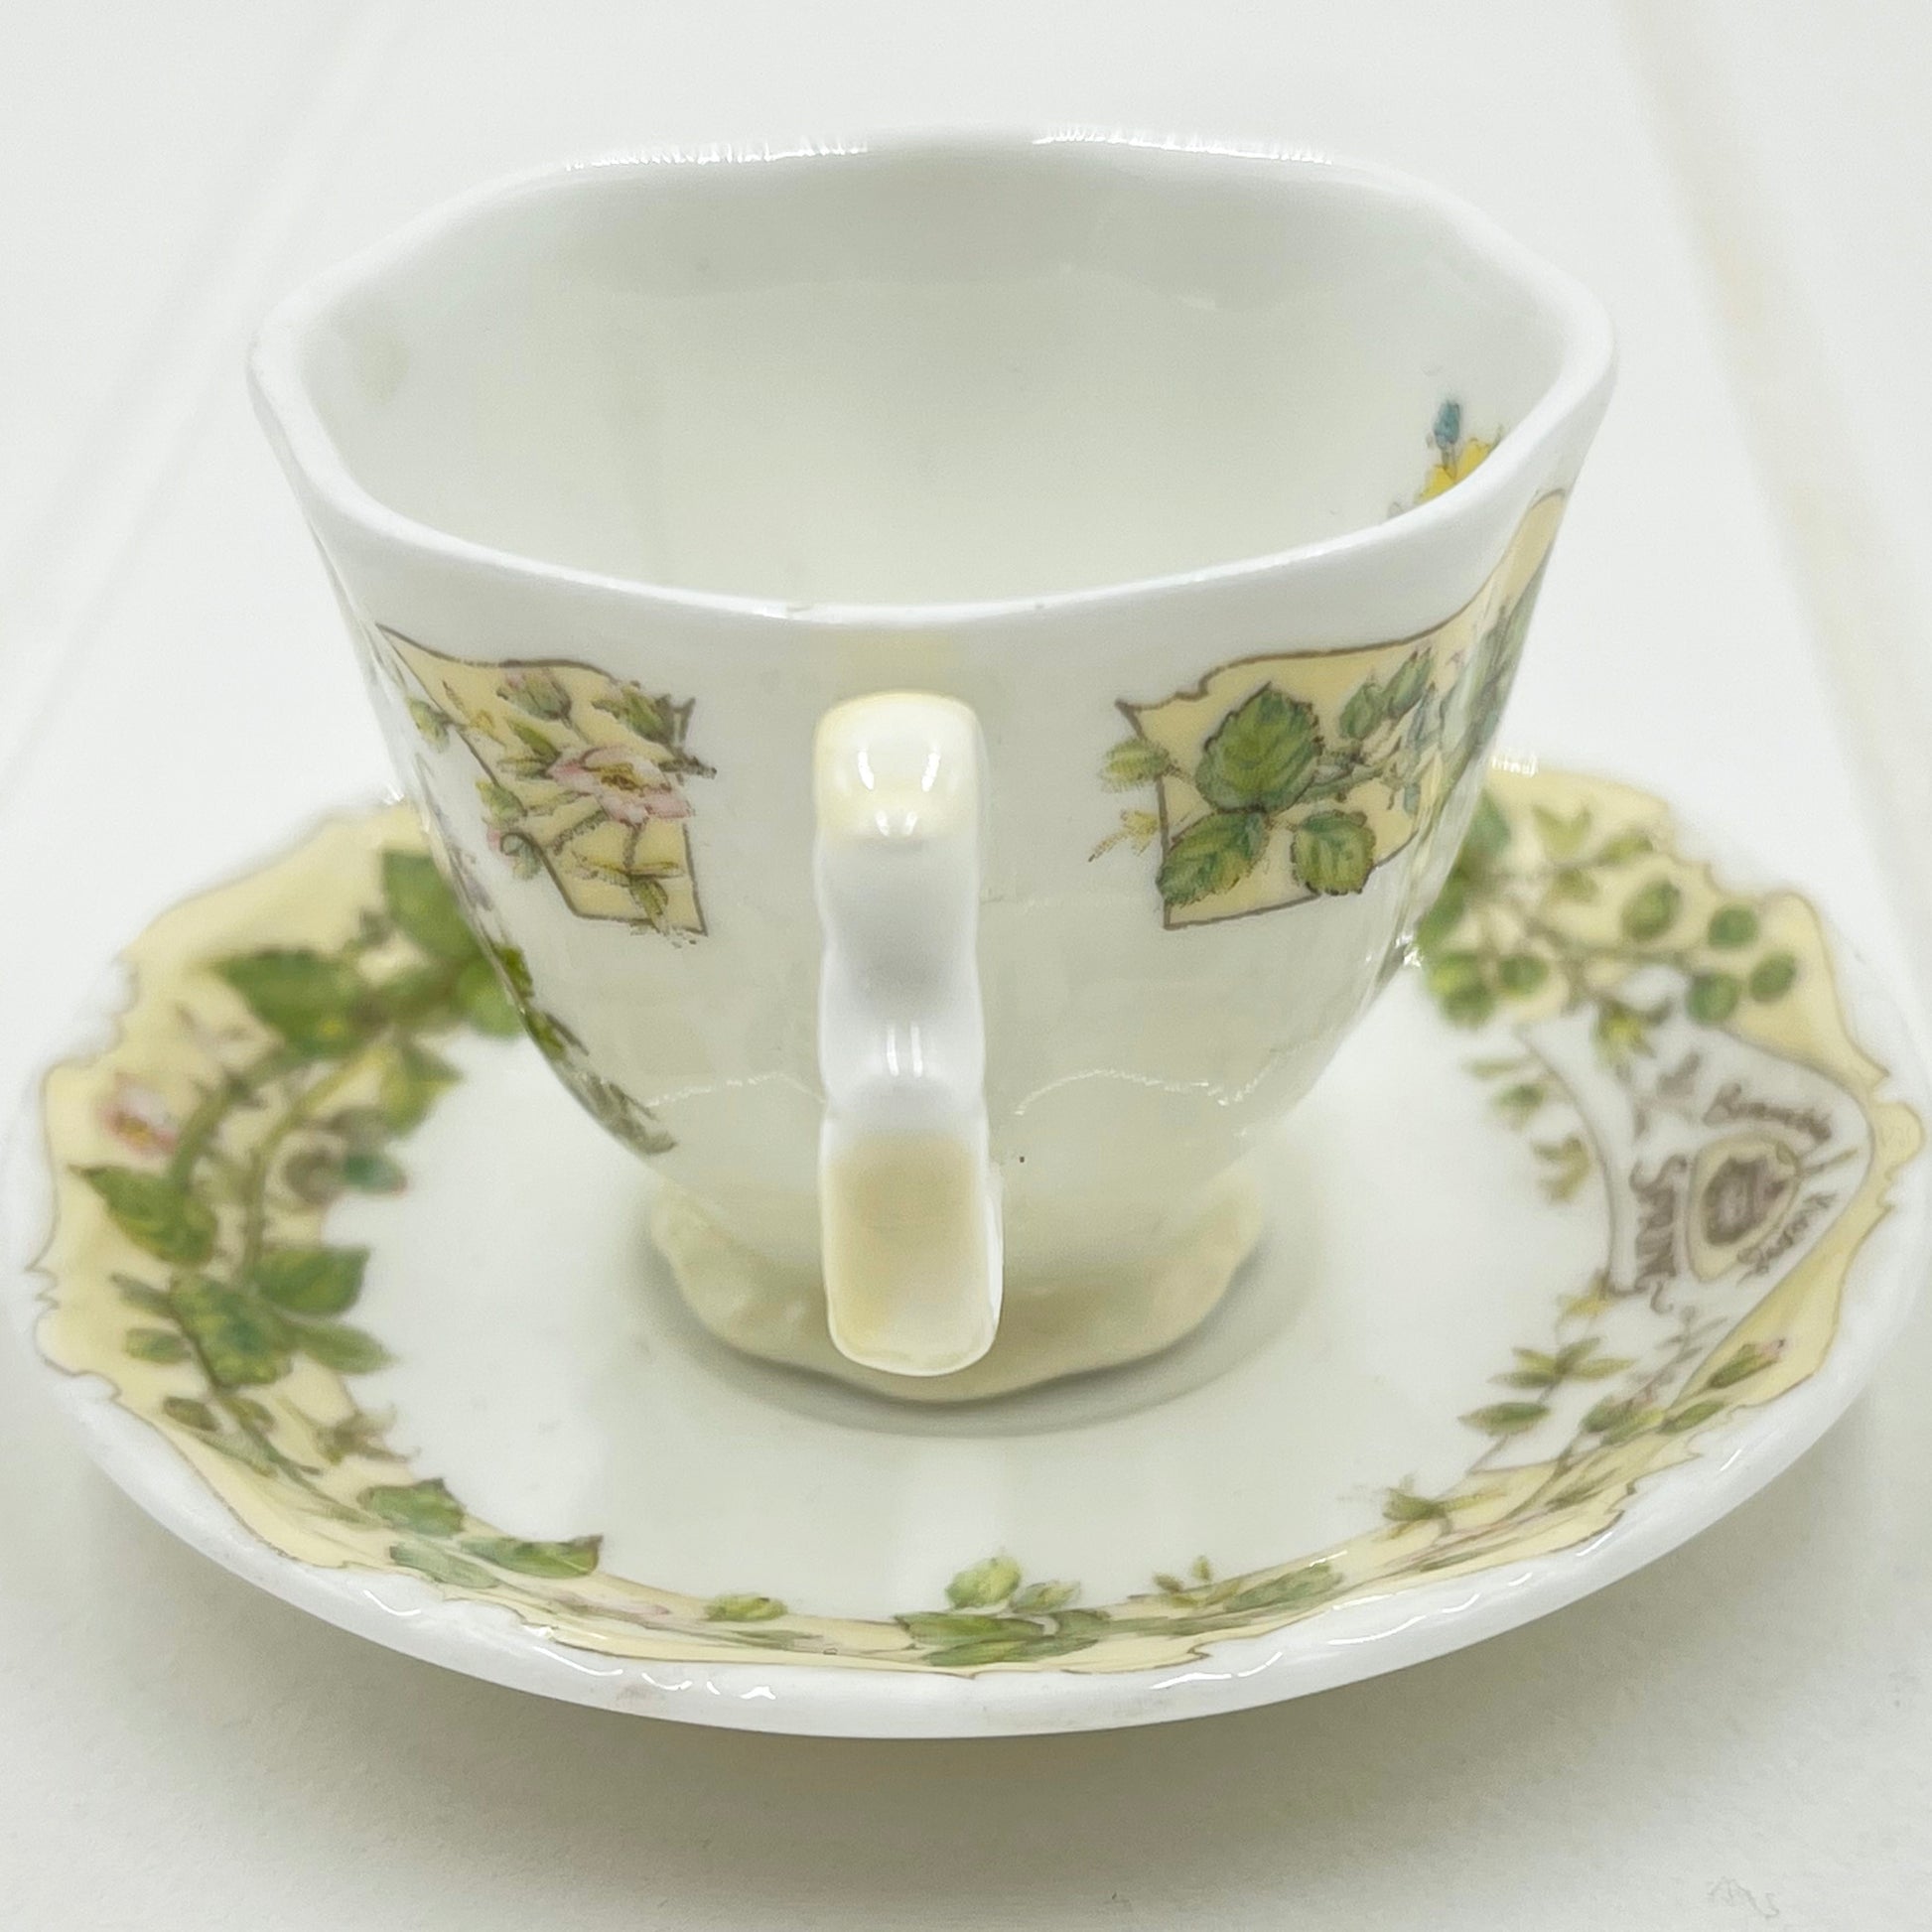 Royal Doulton Brambly Hedge Miniature Spring Teacup and Saucer Duo